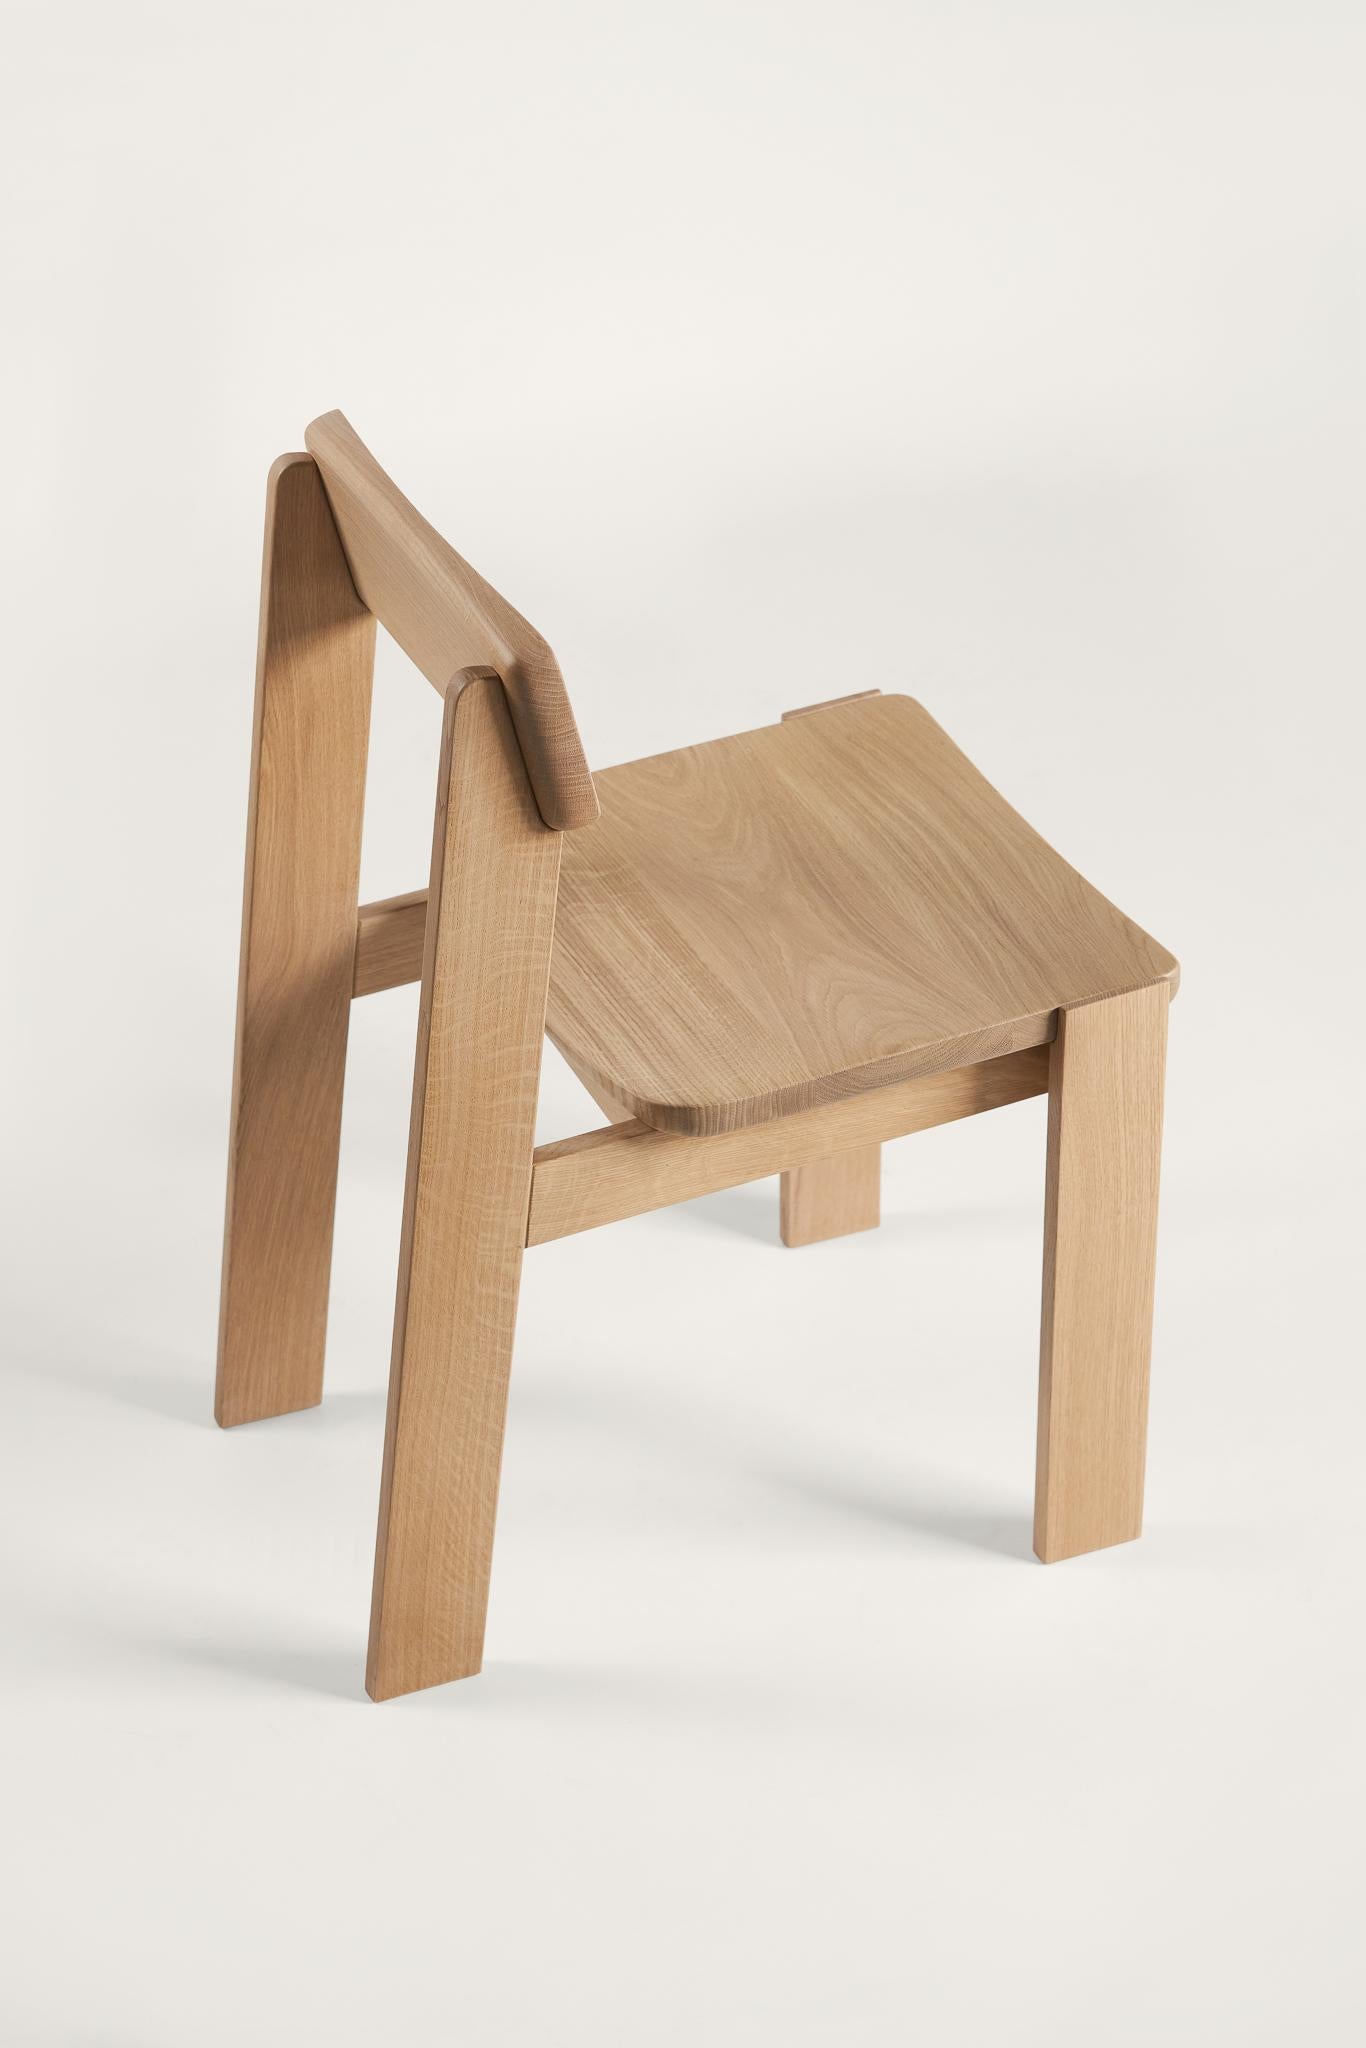 Pasco Chair by Arbore x Studio PHAT For Sale 3